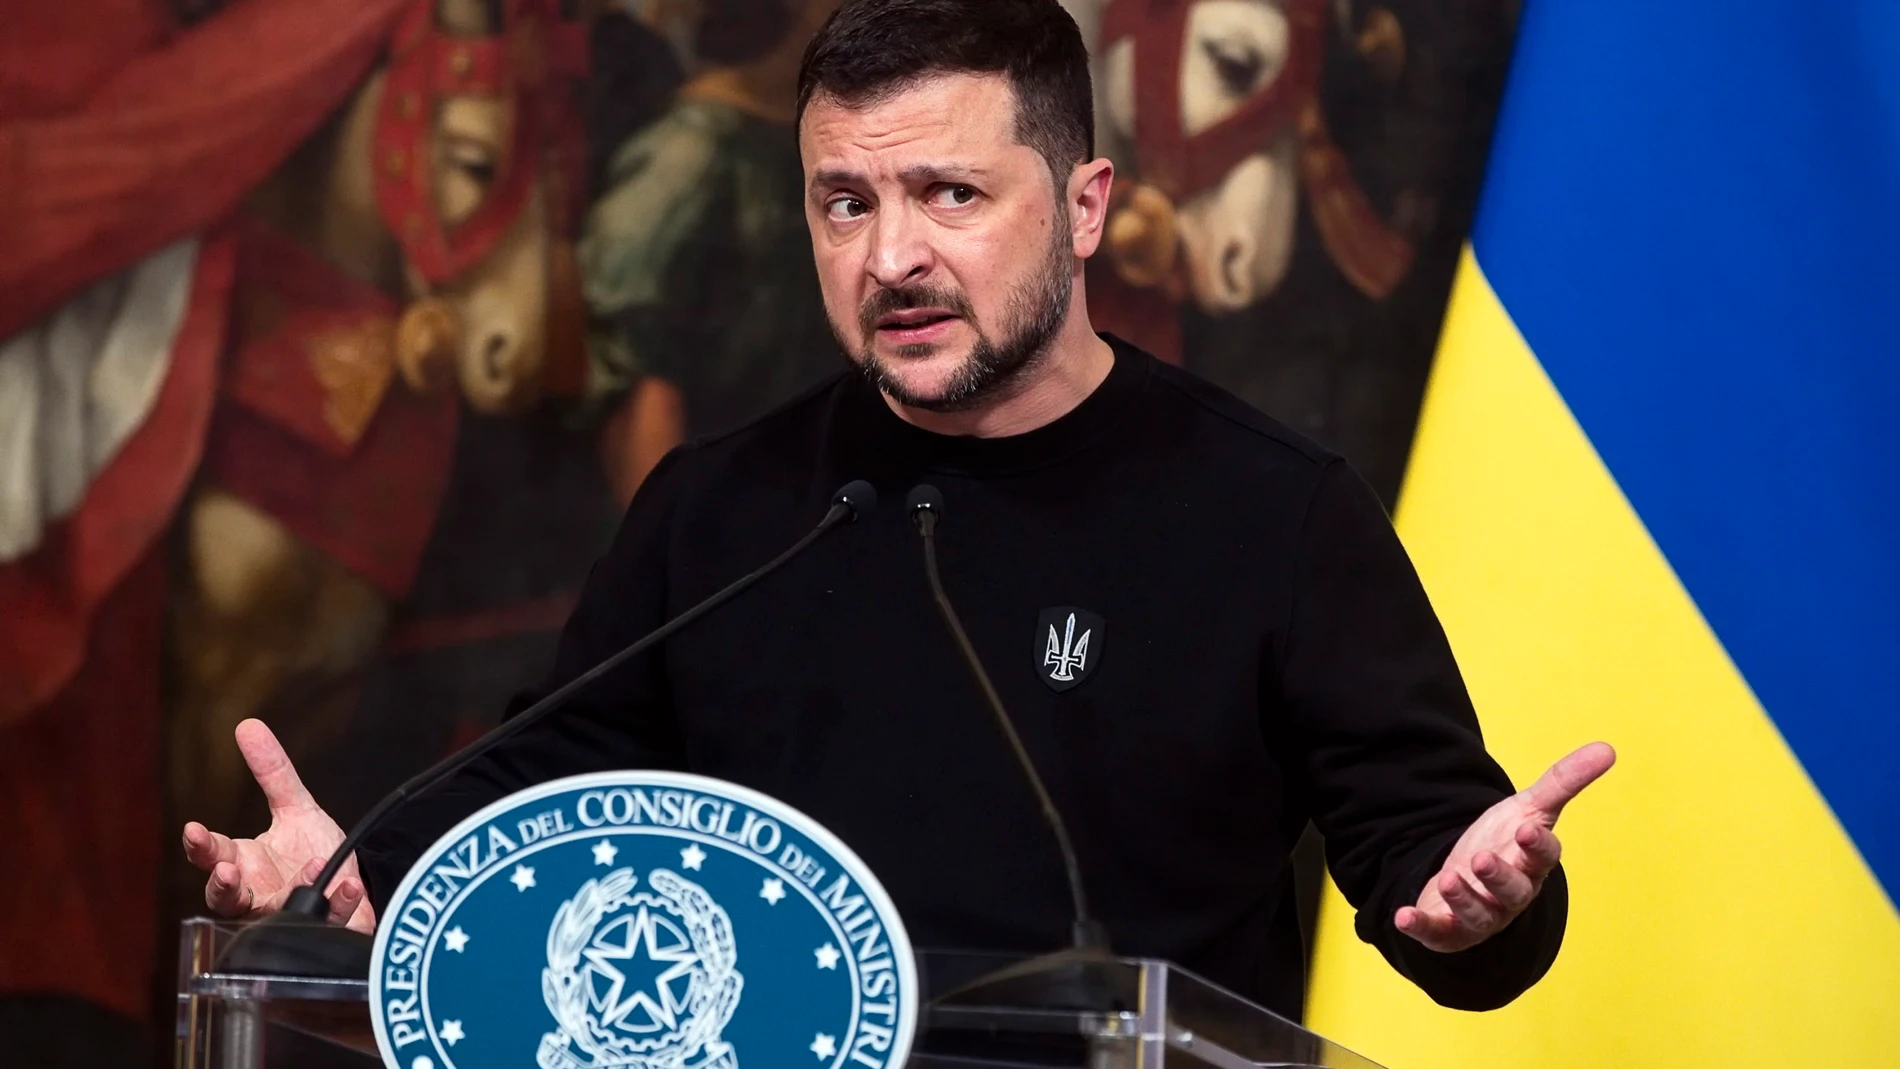 Rome (Italy), 13/05/2023.- Ukraine's President Volodymyr Zelensky attends a joint press conference with Italian prime minister at Chigi Palace in Rome, Italy, 13 May 2023. It is the first time Zelensky visits Italy since the start of the Russian invasion of Ukraine in February 2022. (Italia, Rusia, Ucrania, Roma) EFE/EPA/ANGELO CARCONI 